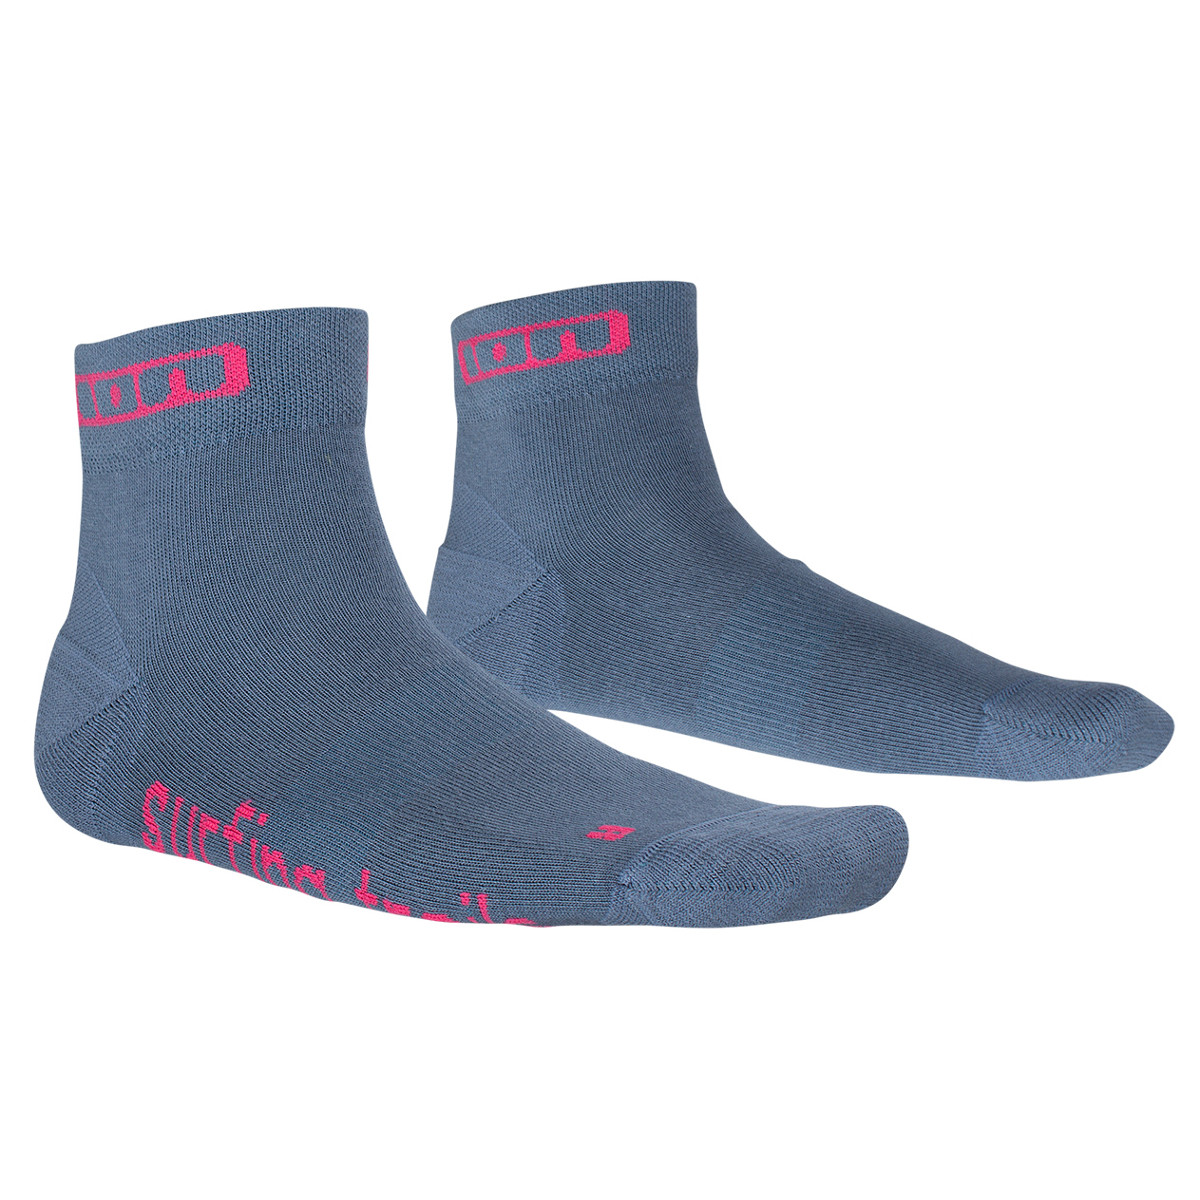 ION Chaussettes Socquettes Short Role Dark Night